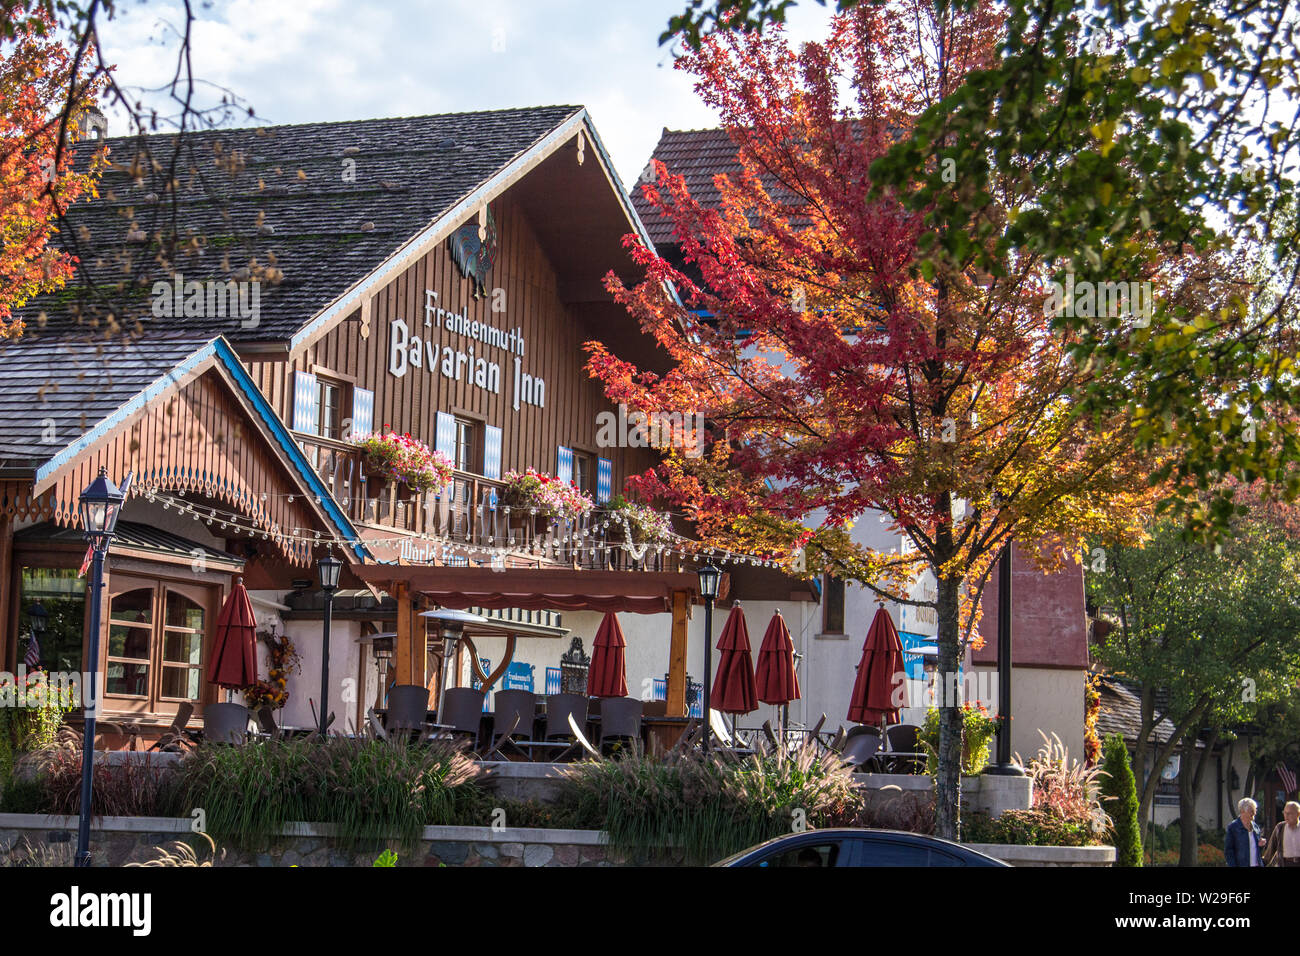 Frankenmuth, Michigan, USA -  Exterior of the Bavarian Inn Lodge in the popular German themed resort town of Frankenmuth. Stock Photo